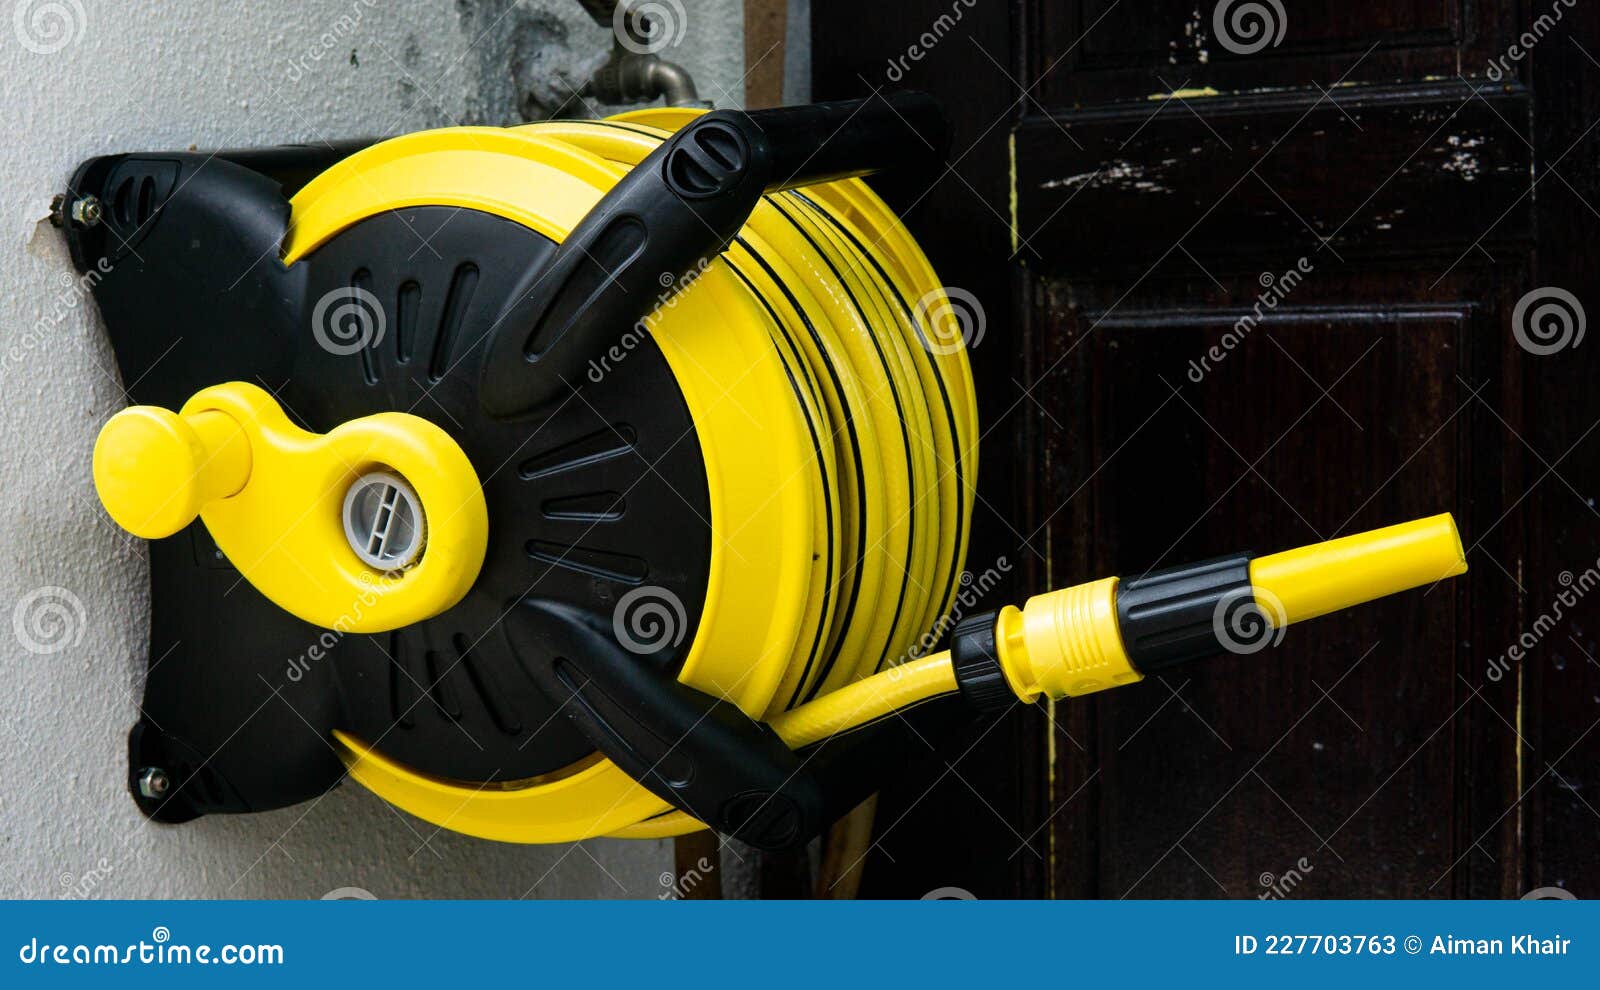 A Yellow Wall Mounted Garden Water Hose Reel with Sprinkler or